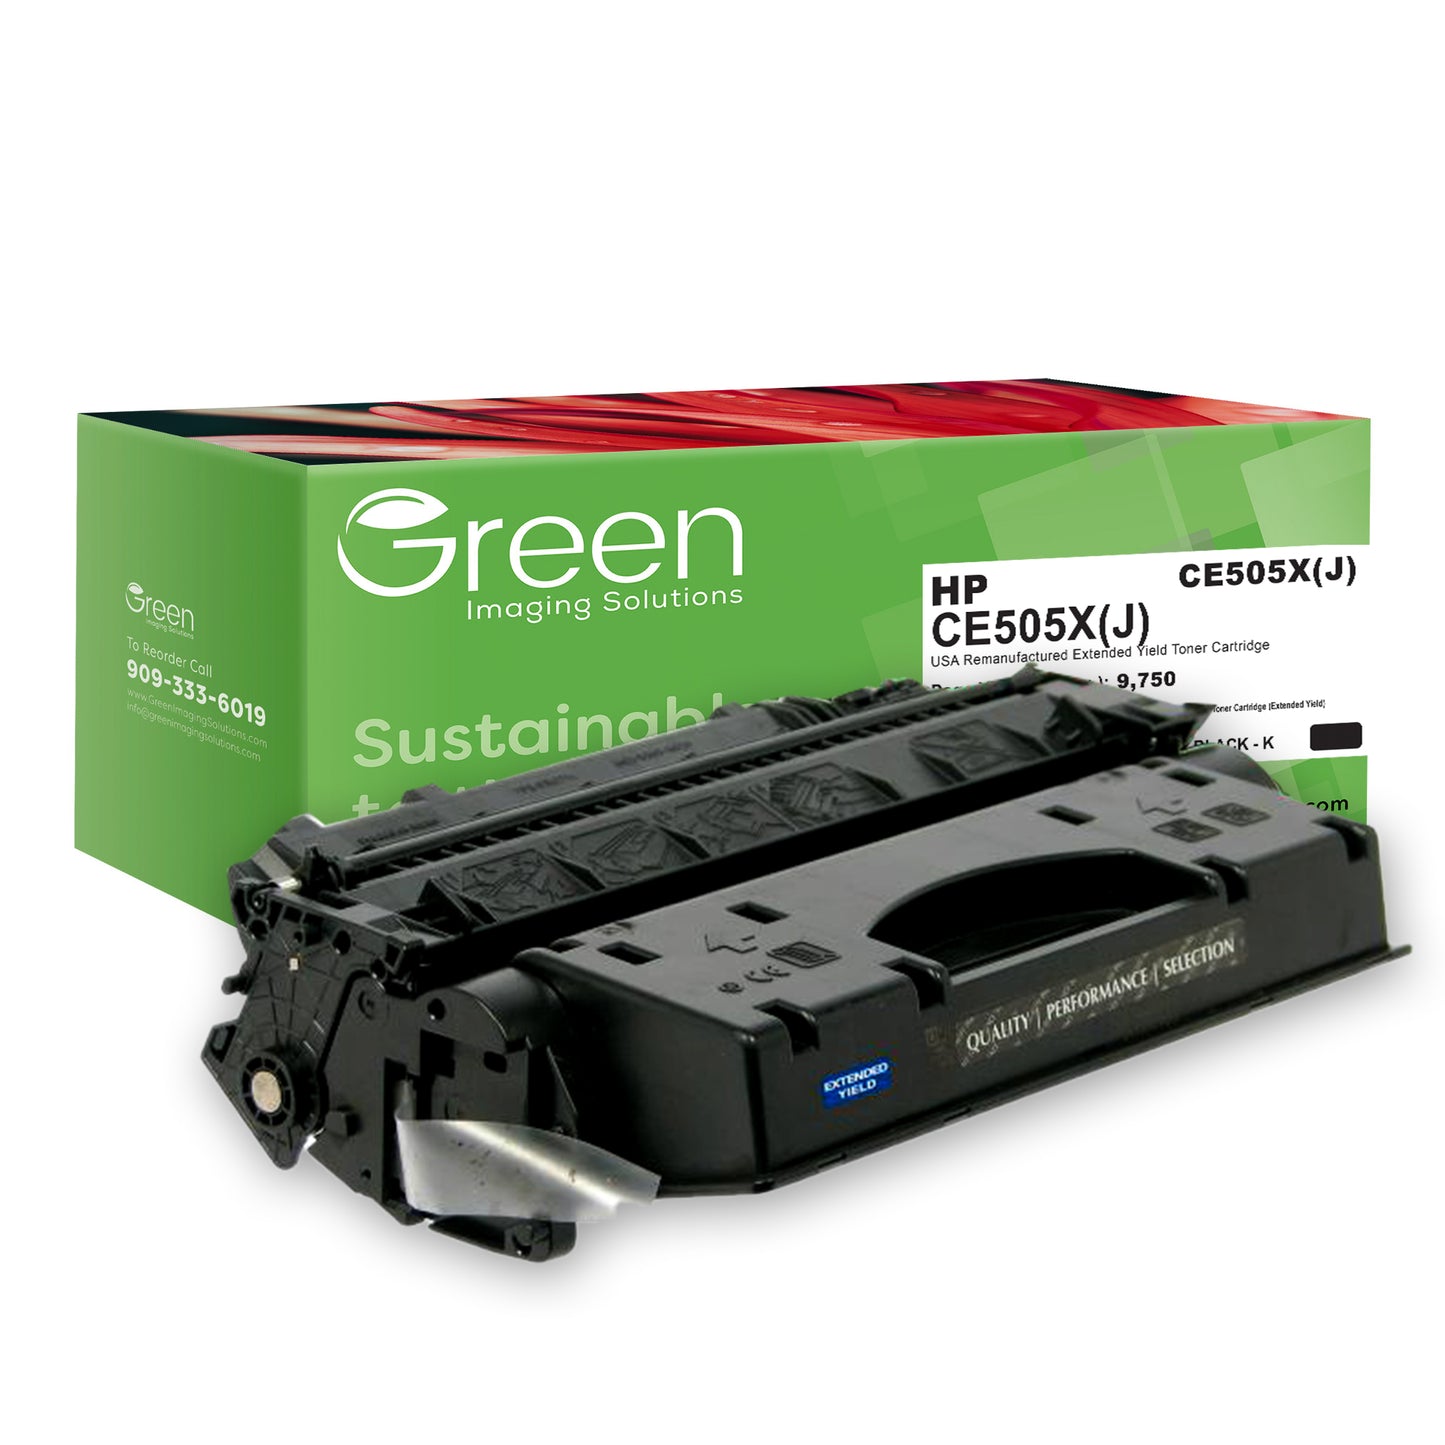 GIS USA Remanufactured Extended Yield Toner Cartridge for HP CE505X